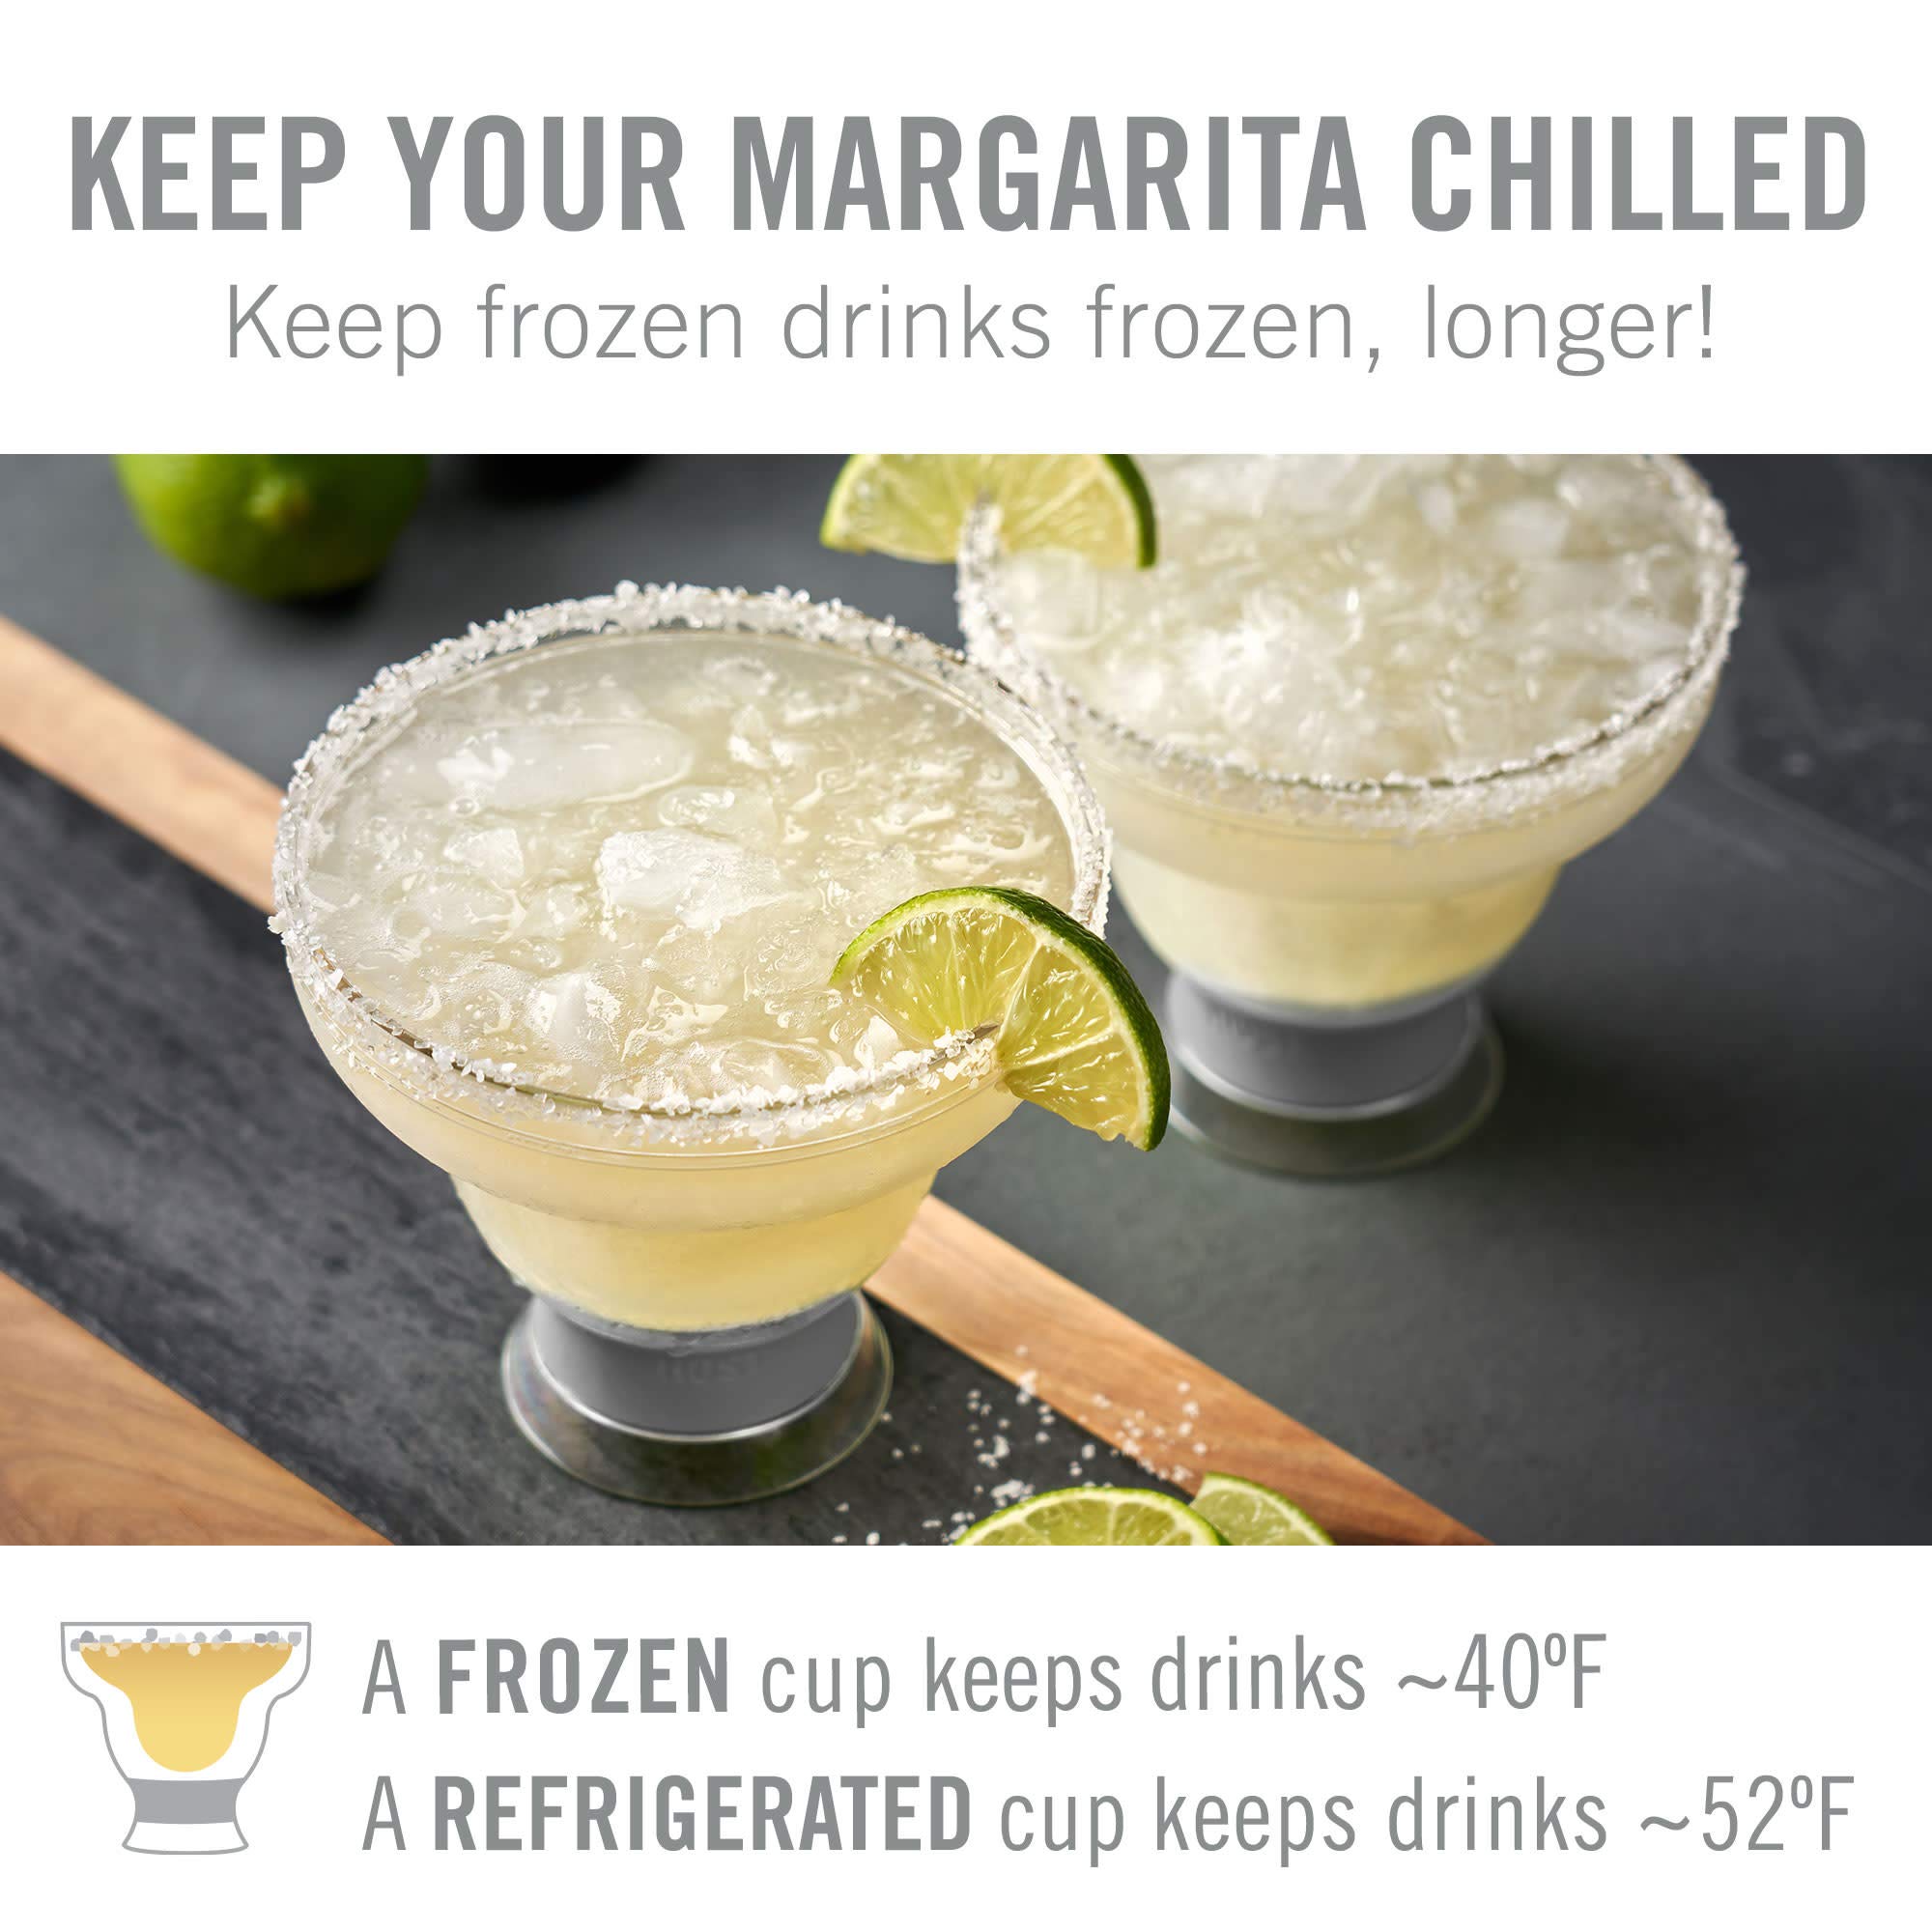 HOST FREEZE Margarita Cocktail Glasses, Frozen Cup Double Wall Plastic Margarita Glasses Drinking Set Modern Drinking Glasses Grey Set of 4